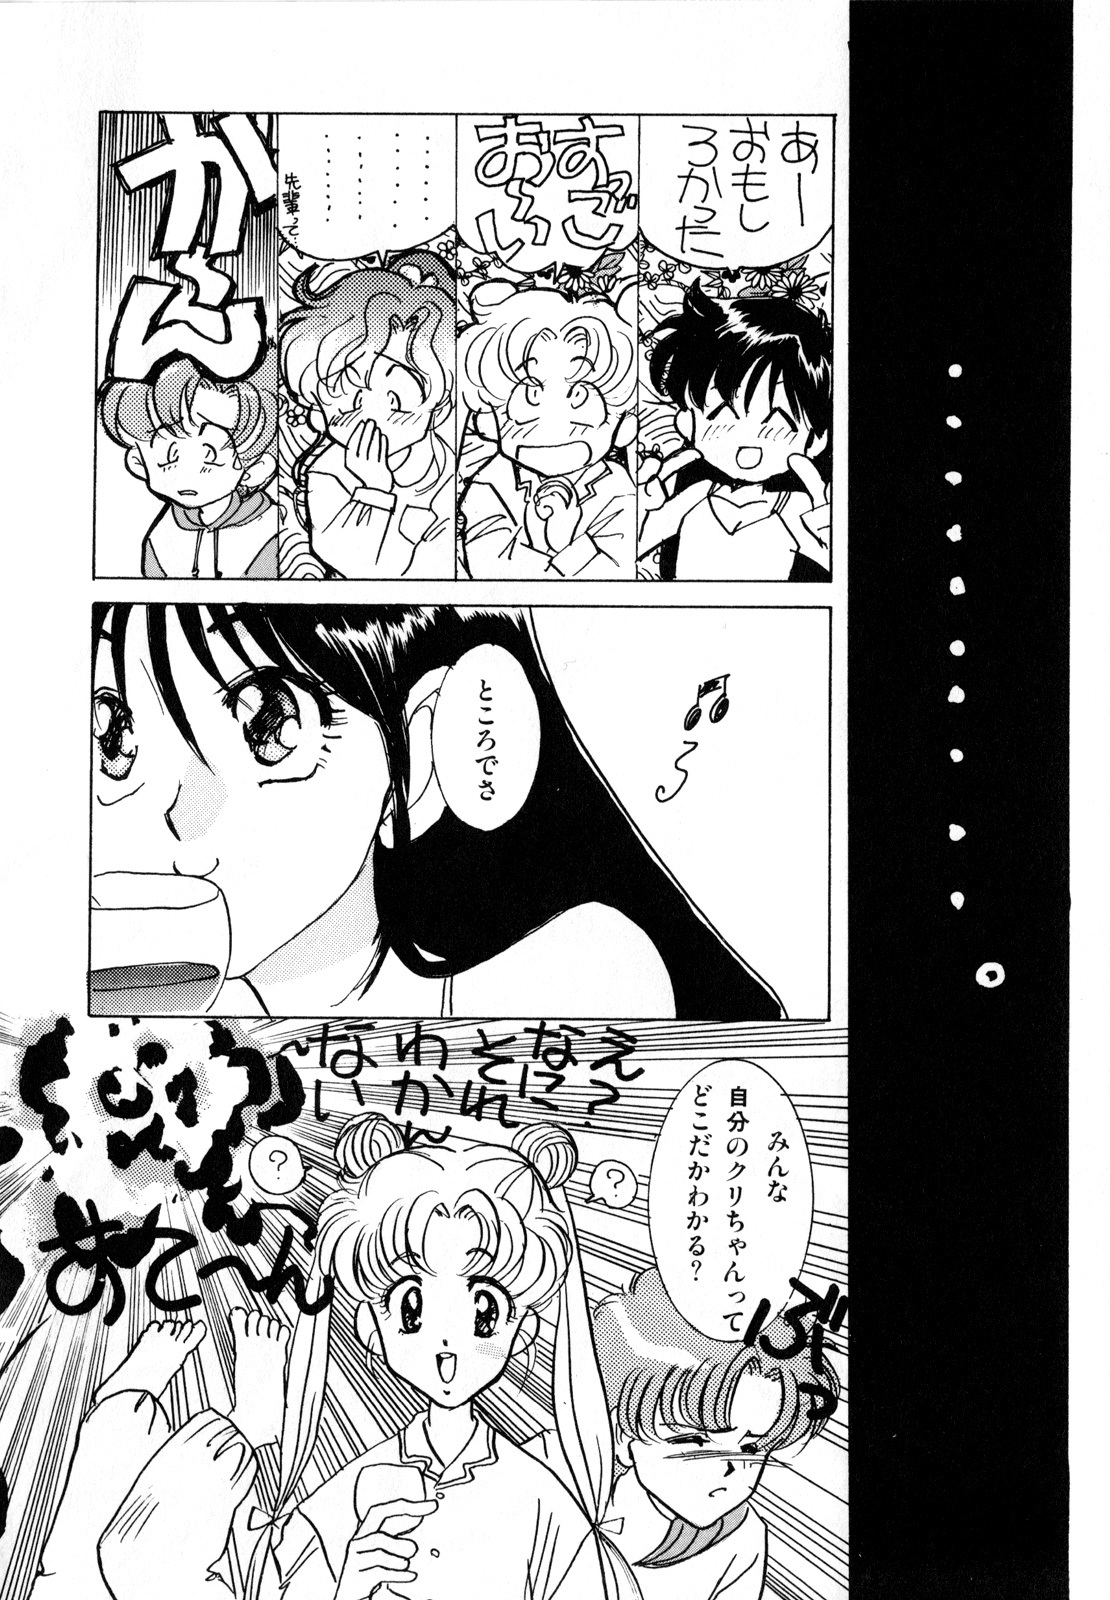 [Anthology] Lunatic Party 1 (Sailor Moon) page 29 full